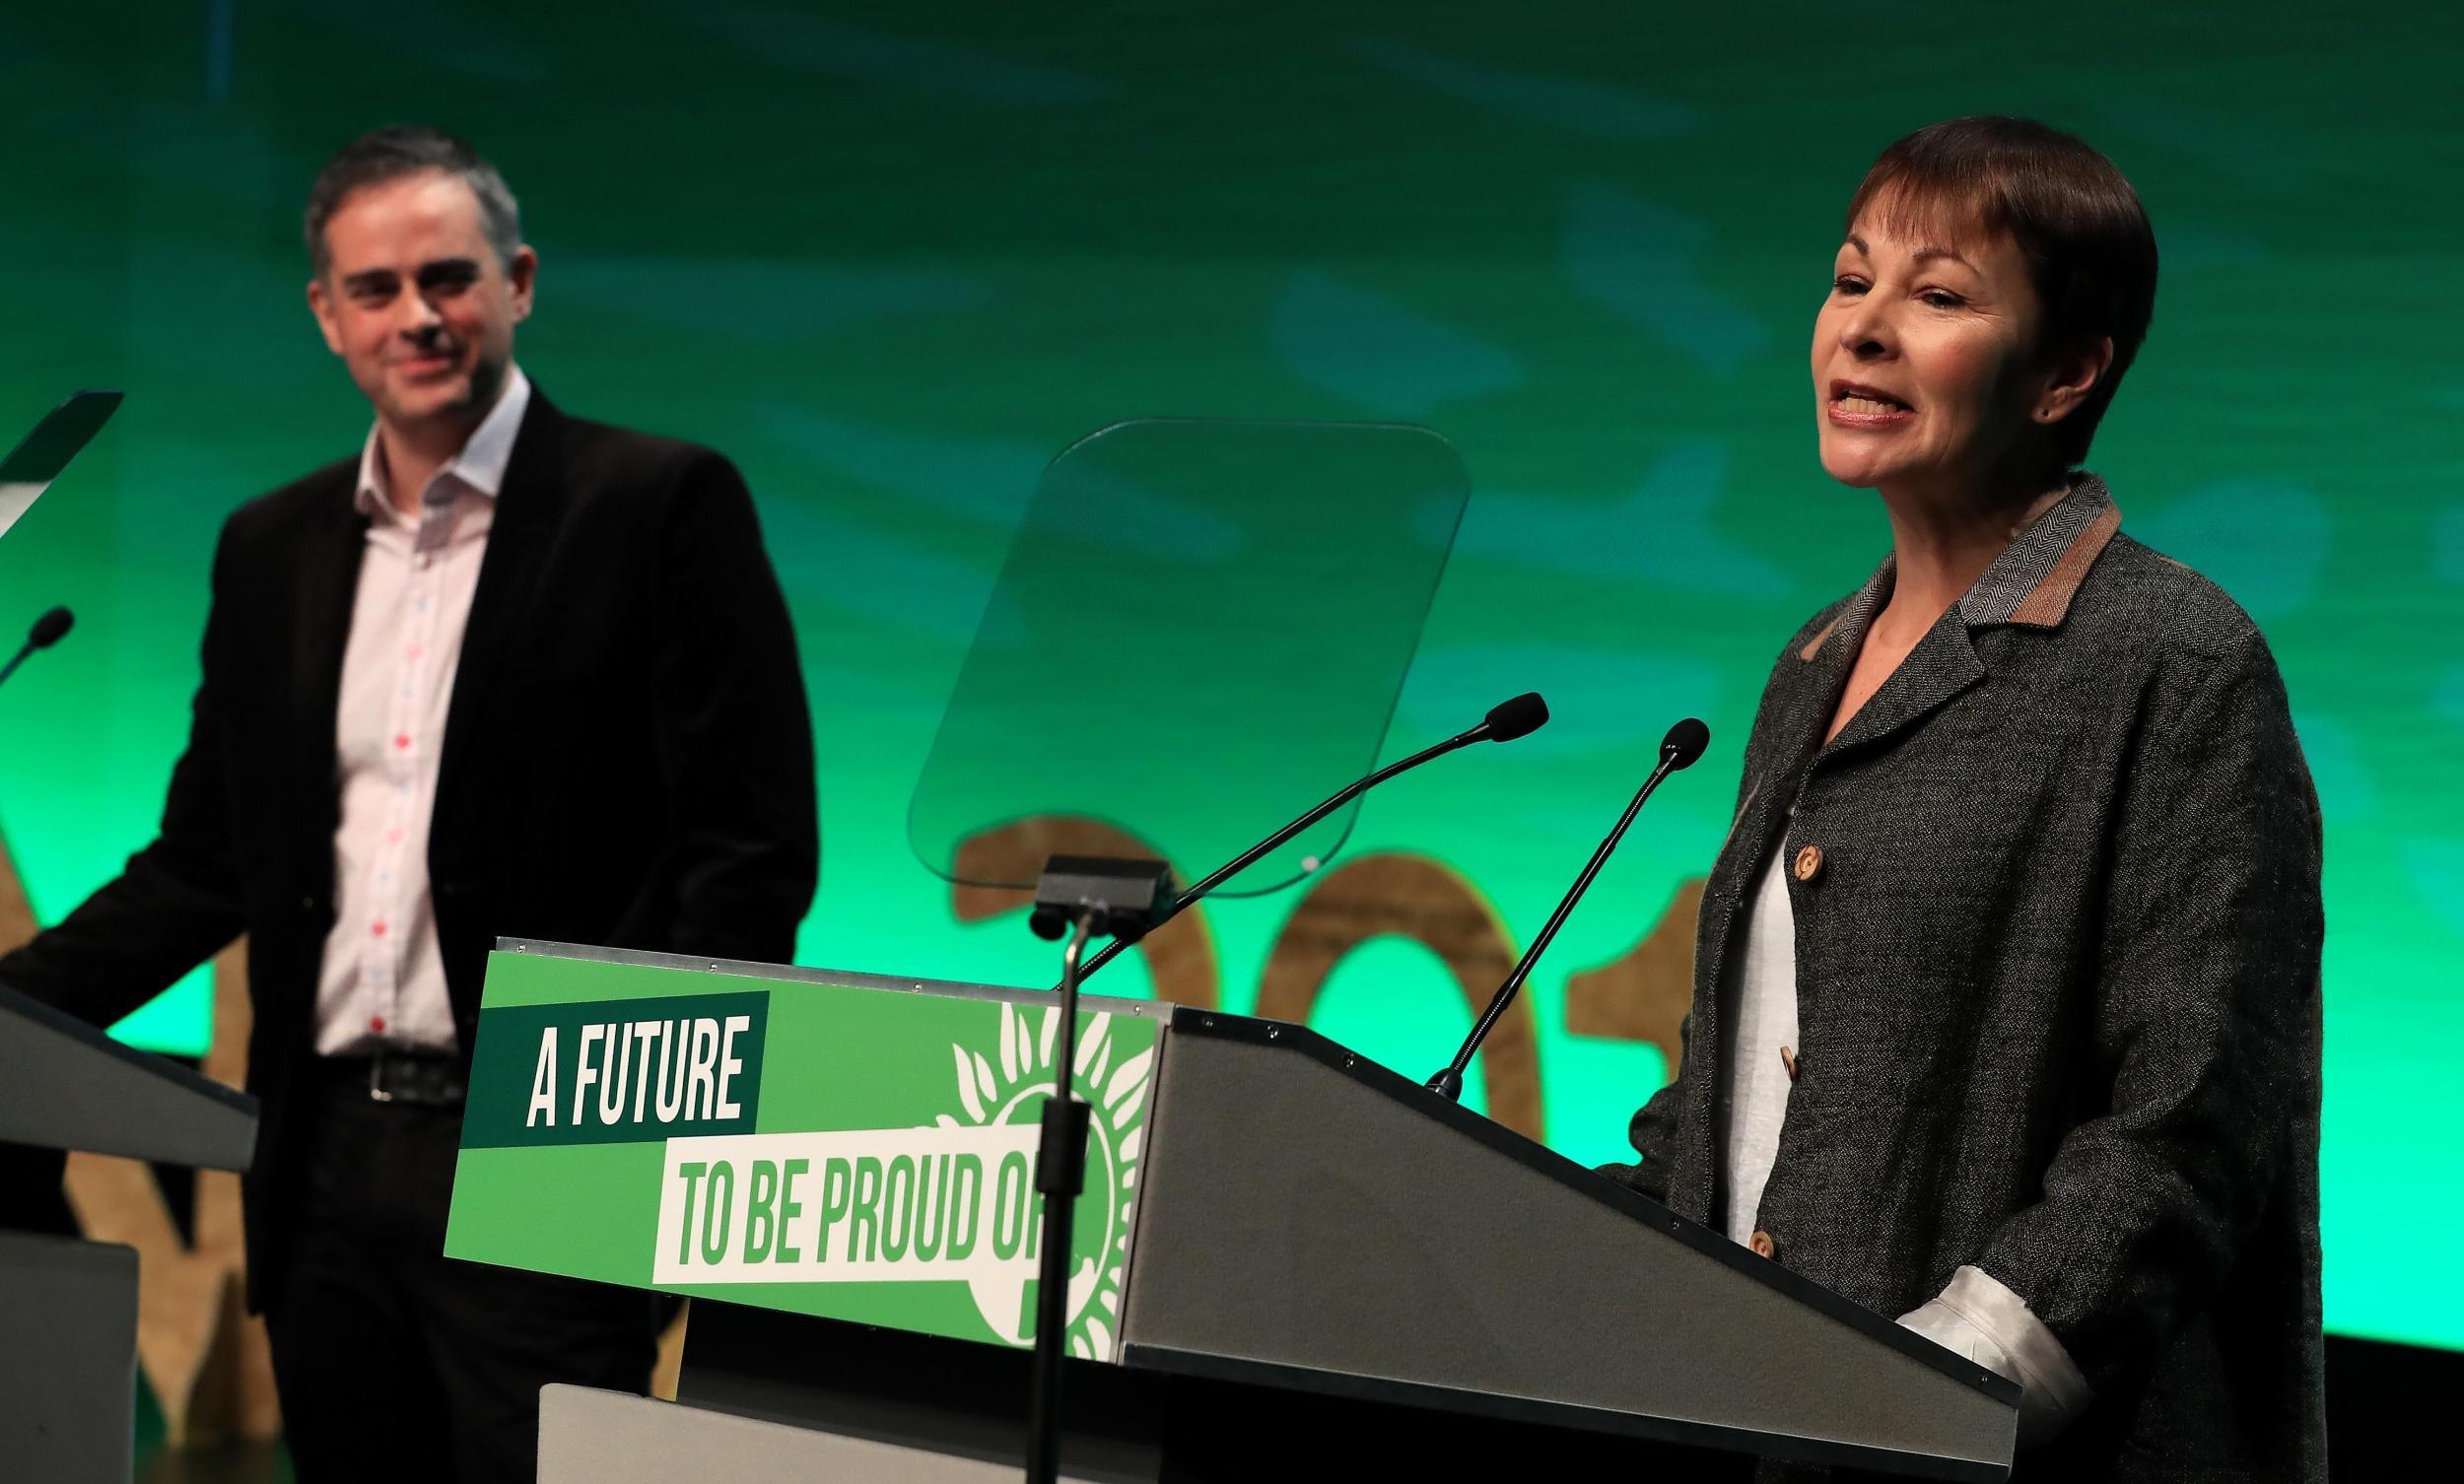 Green Party co-leaders Jonathan Bartley and Caroline Lucas speak at the Green Party Spring Conference at the ACC in Liverpool.